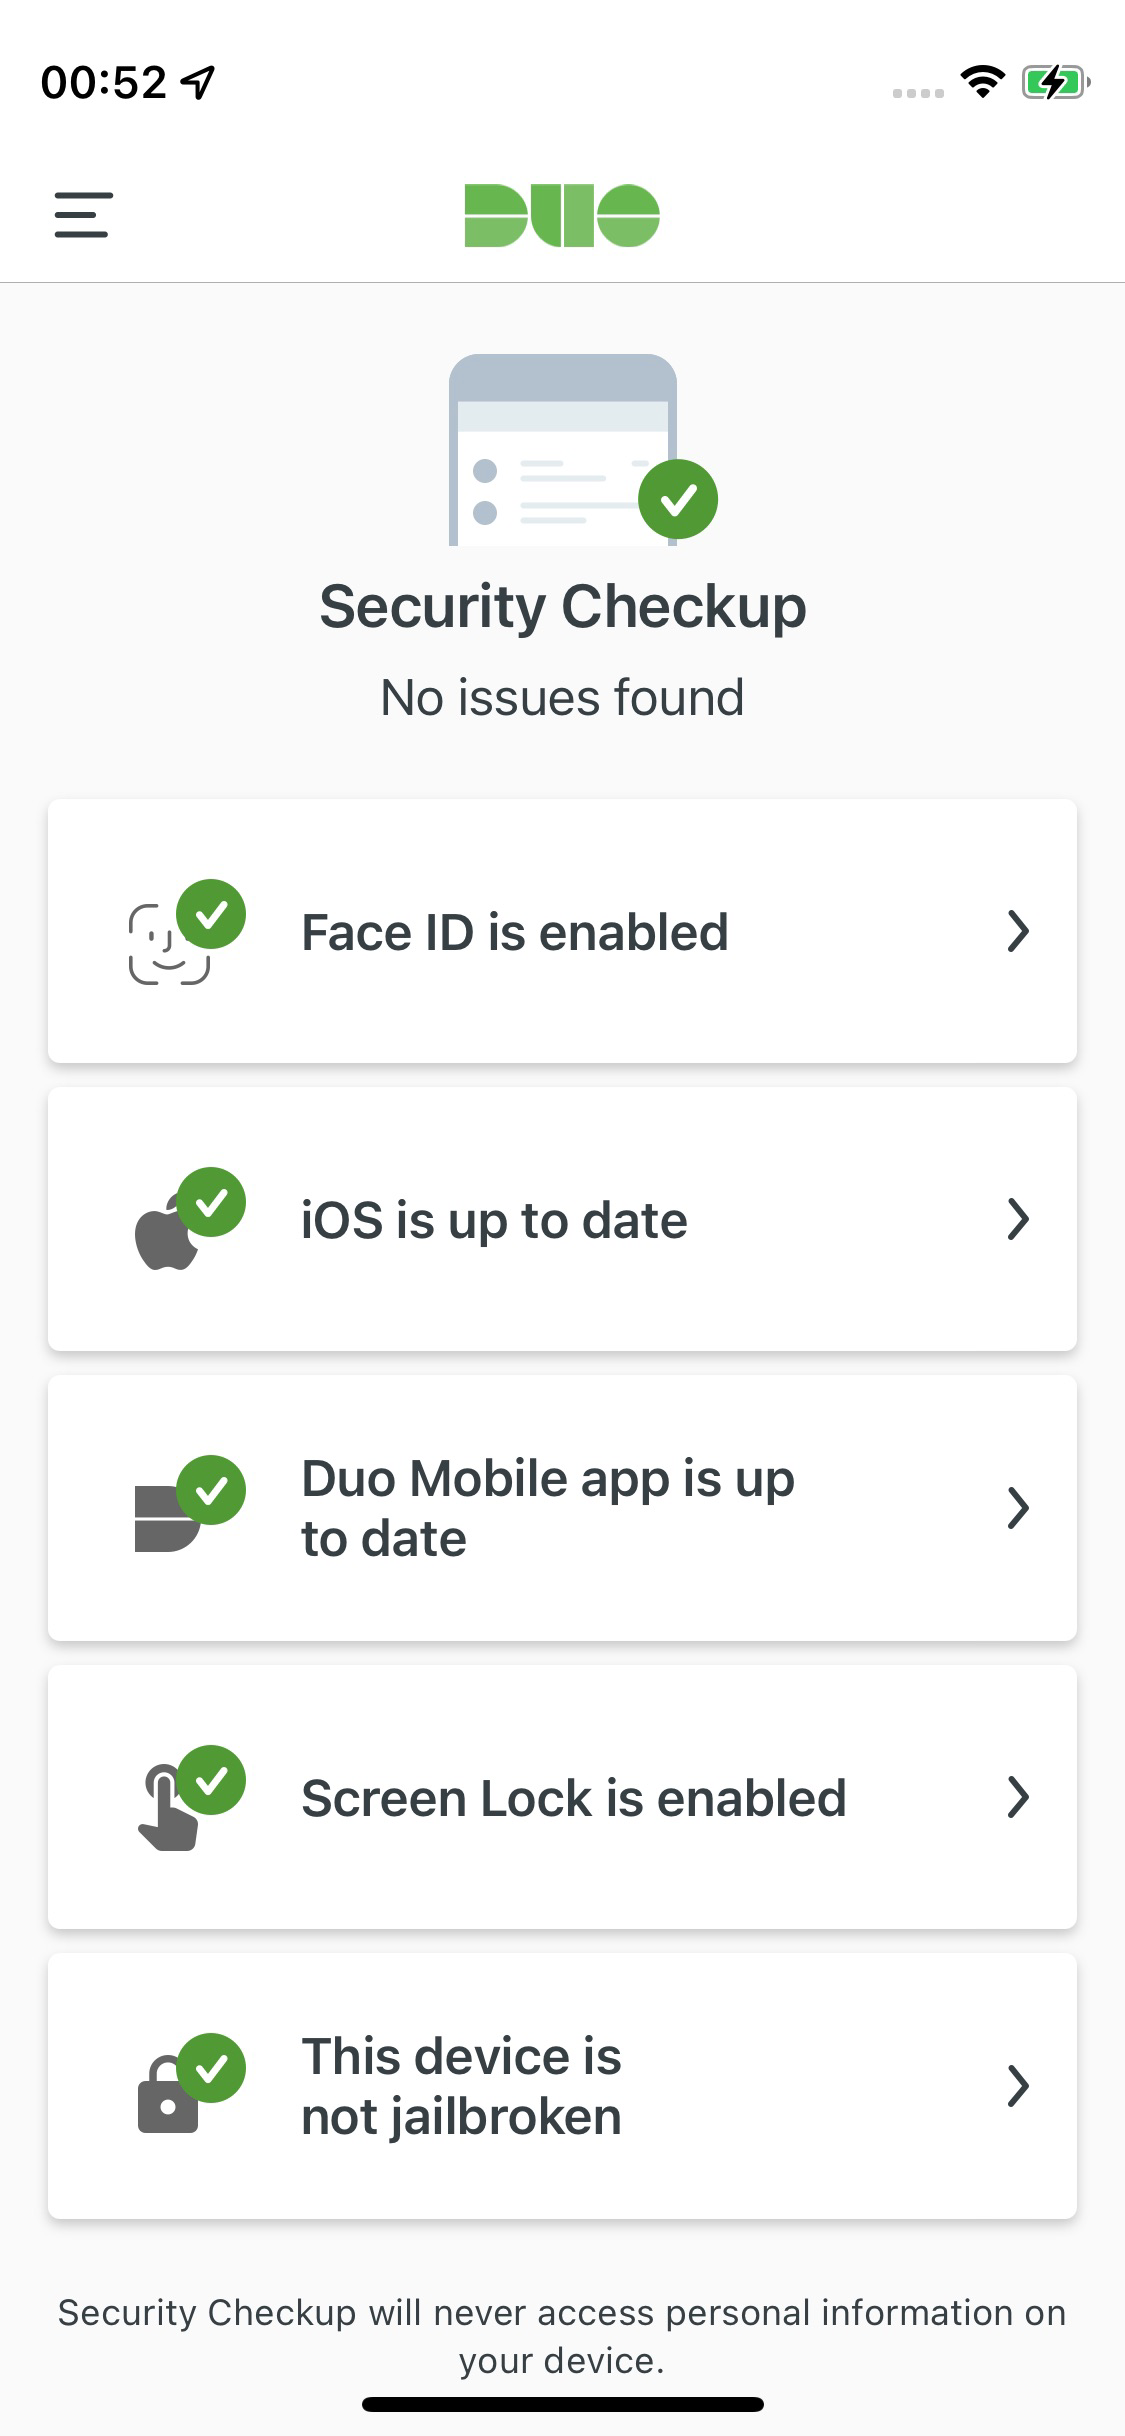 Duo Mobile Security Checkup - No Issues